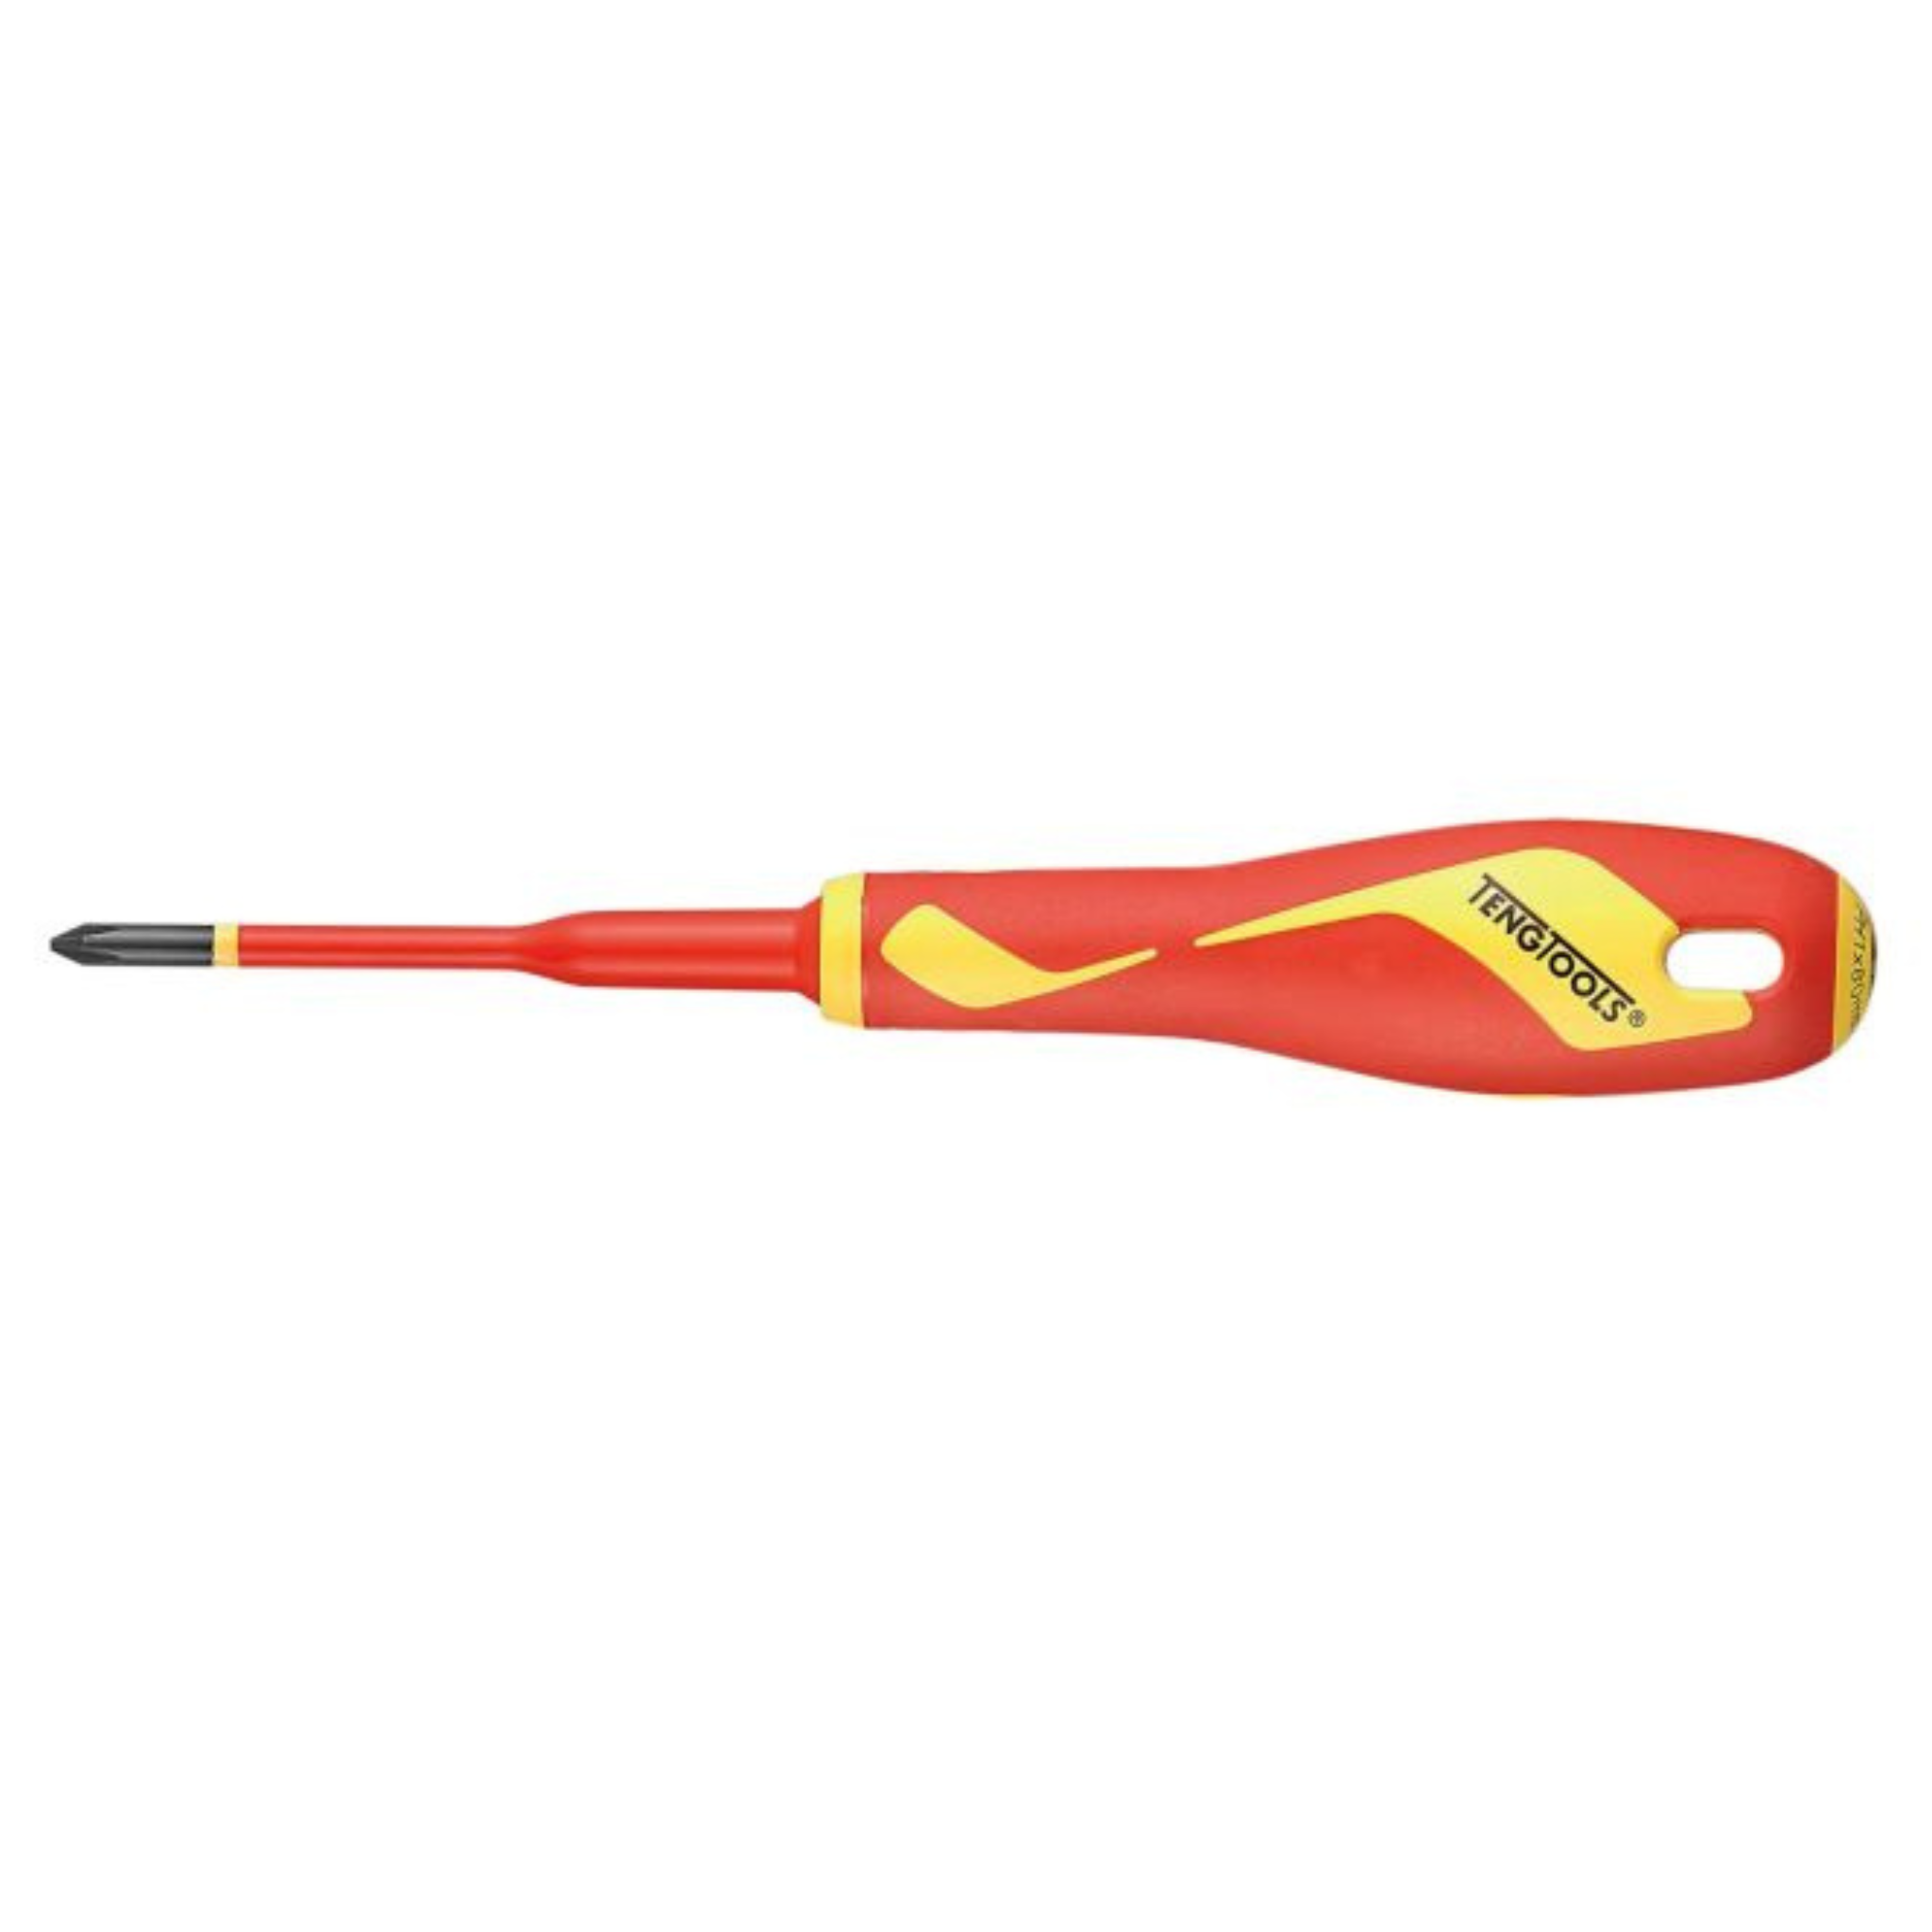 Teng Tools 1000 Volt Insulated Phillips/PH Type Ultra Slim Screwdrivers